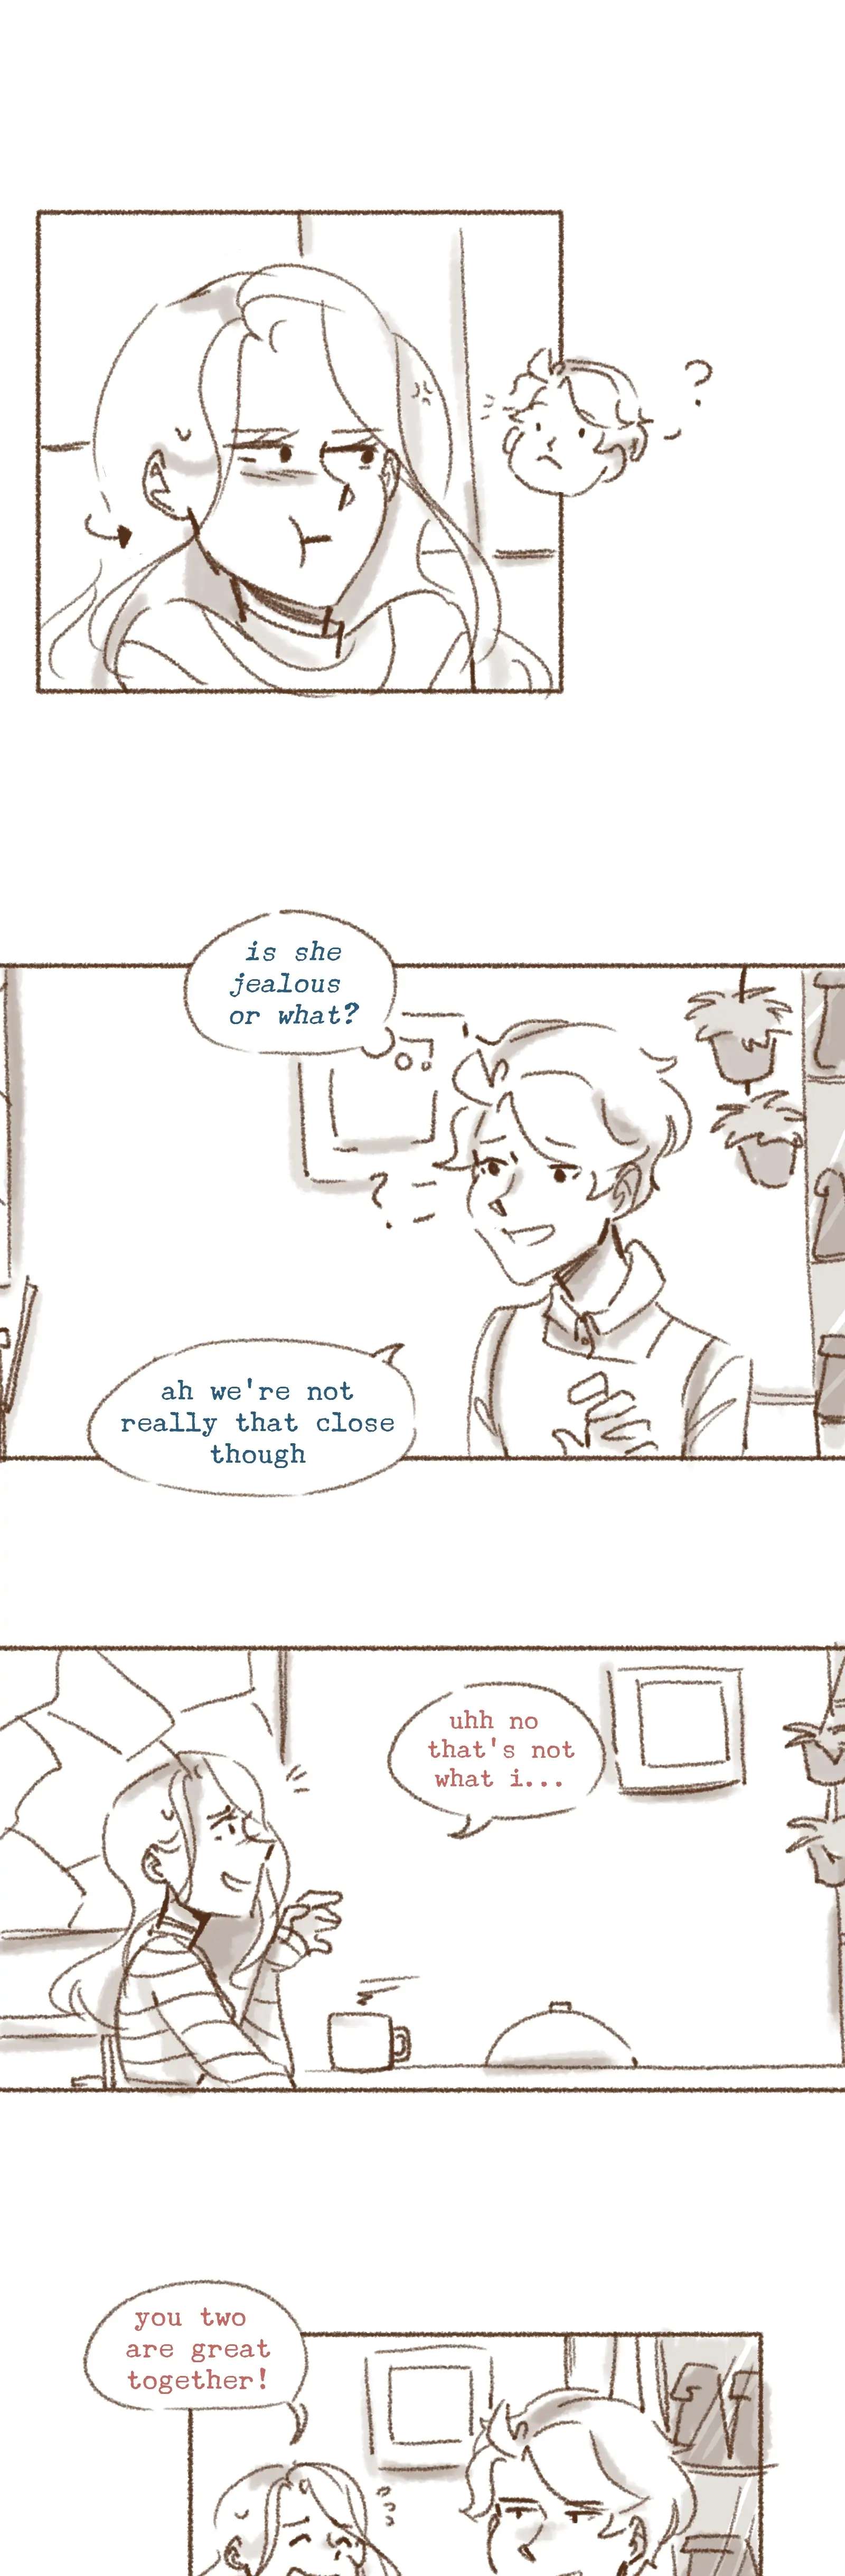 Their Coffee Shop - Page 3